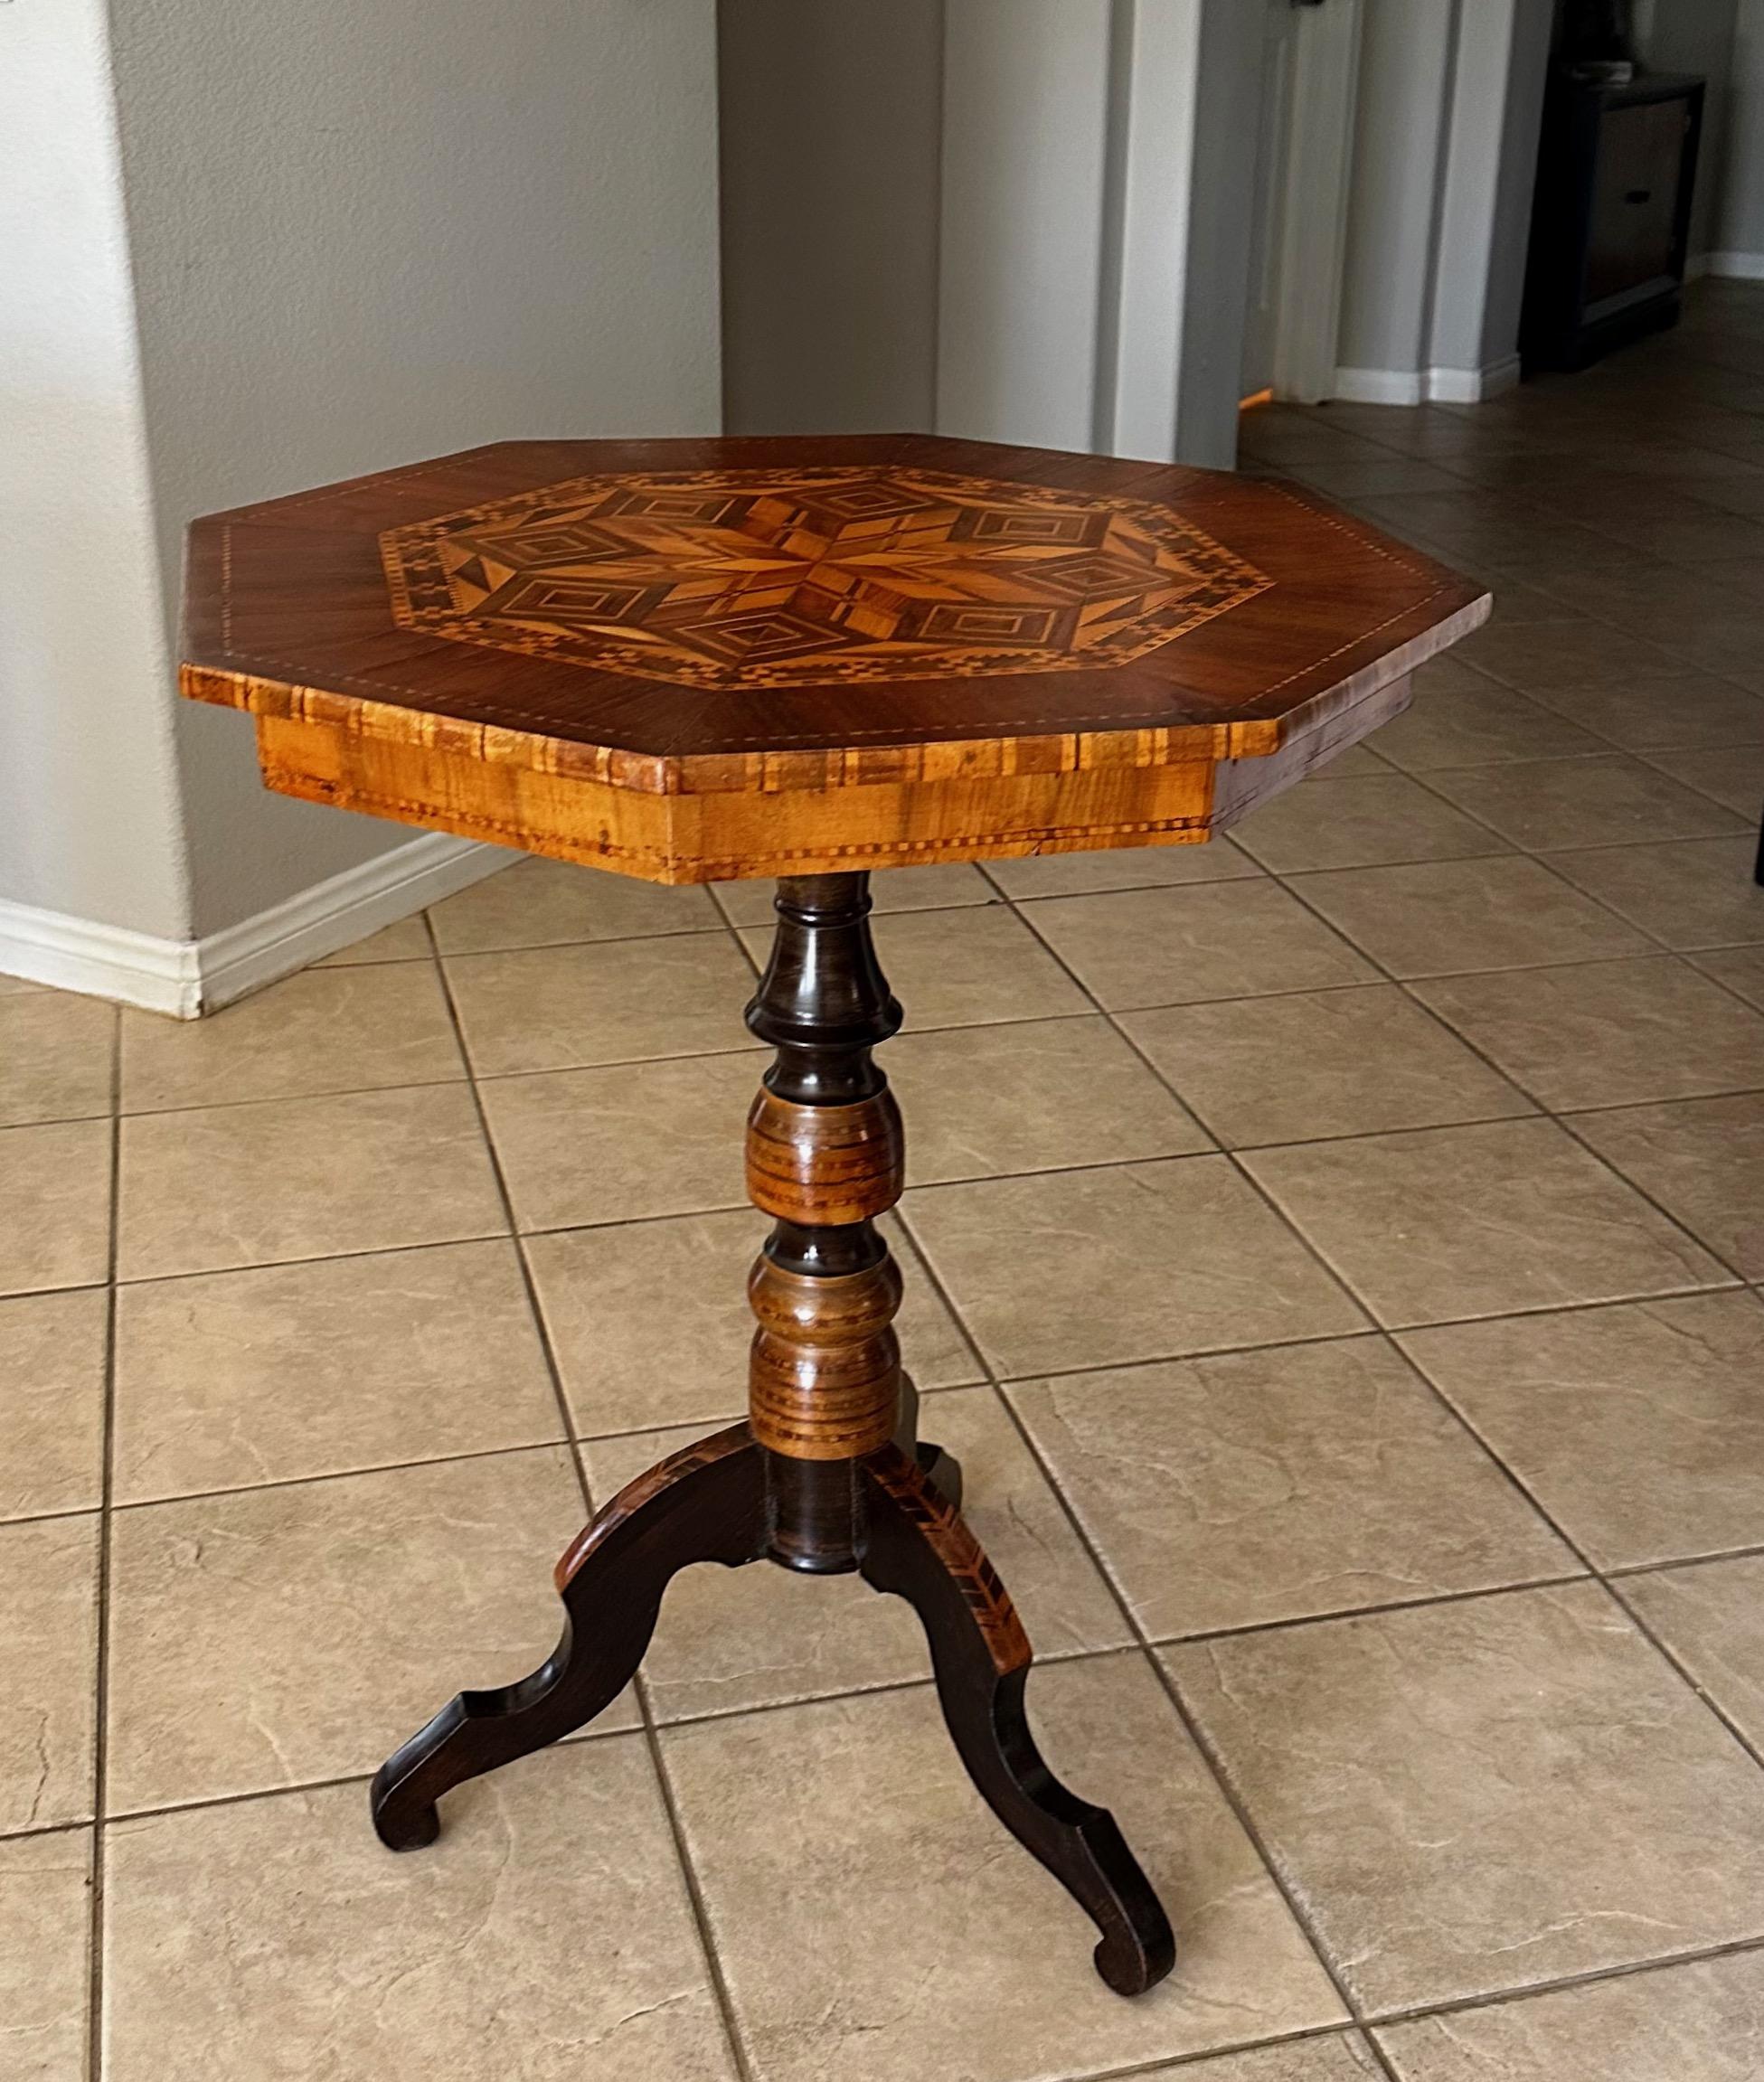 20th Century Italian Sorrento Inlaid Marquetry Side Table Circa 1900 For Sale